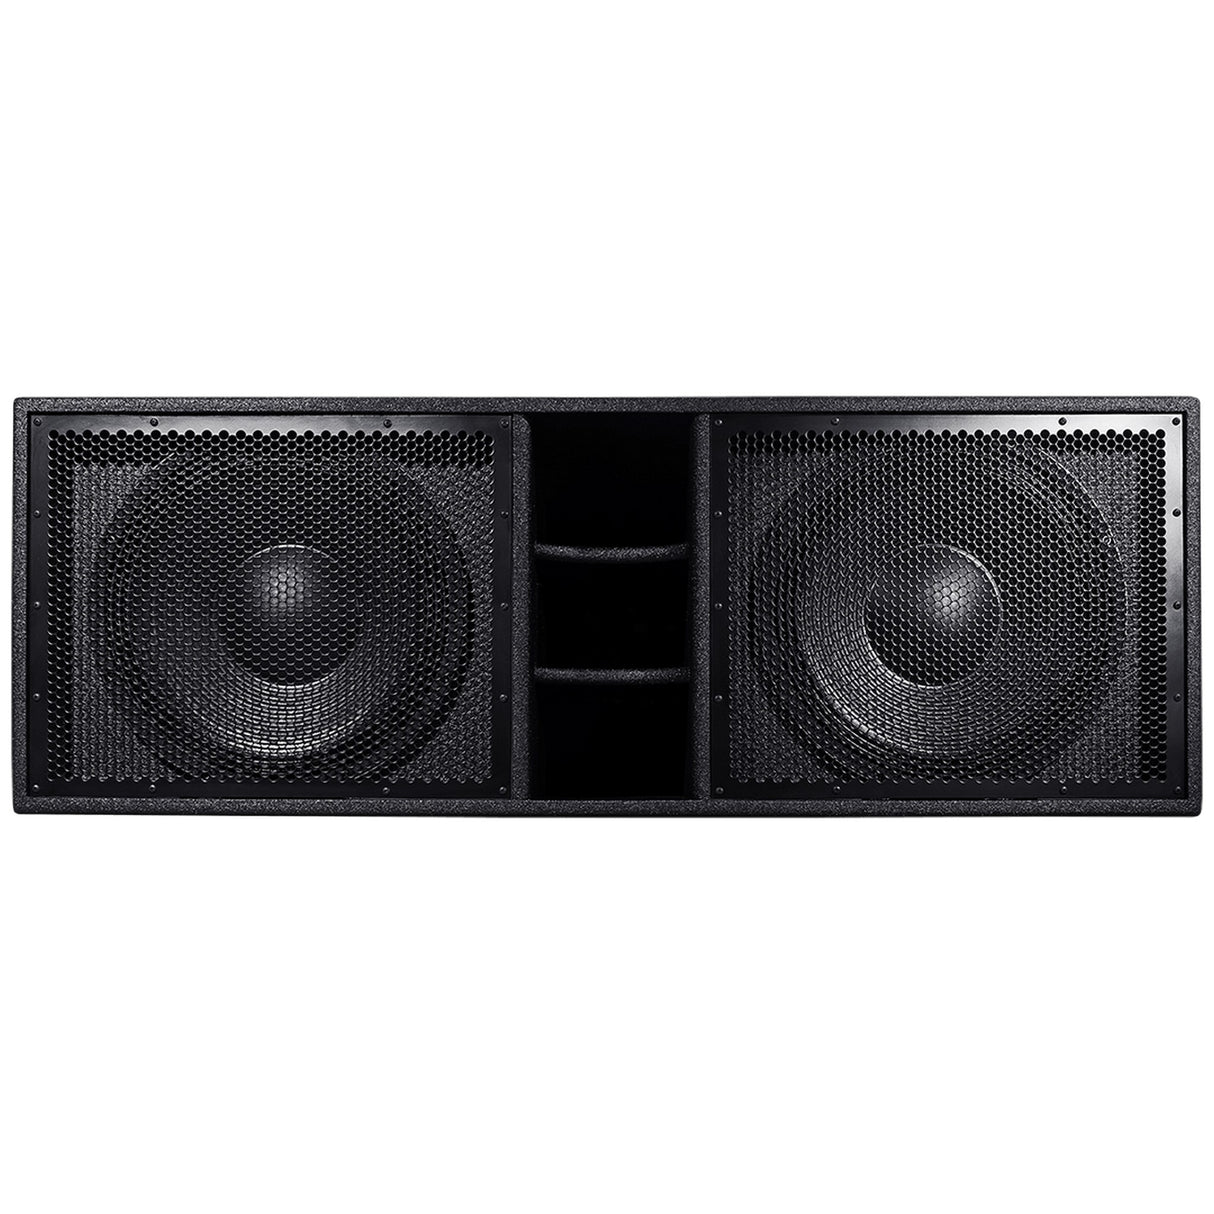 BASSBOSS SSP215-MK3 5000W Dual 15-Inch Vented Direct-Radiating Powered Subwoofer